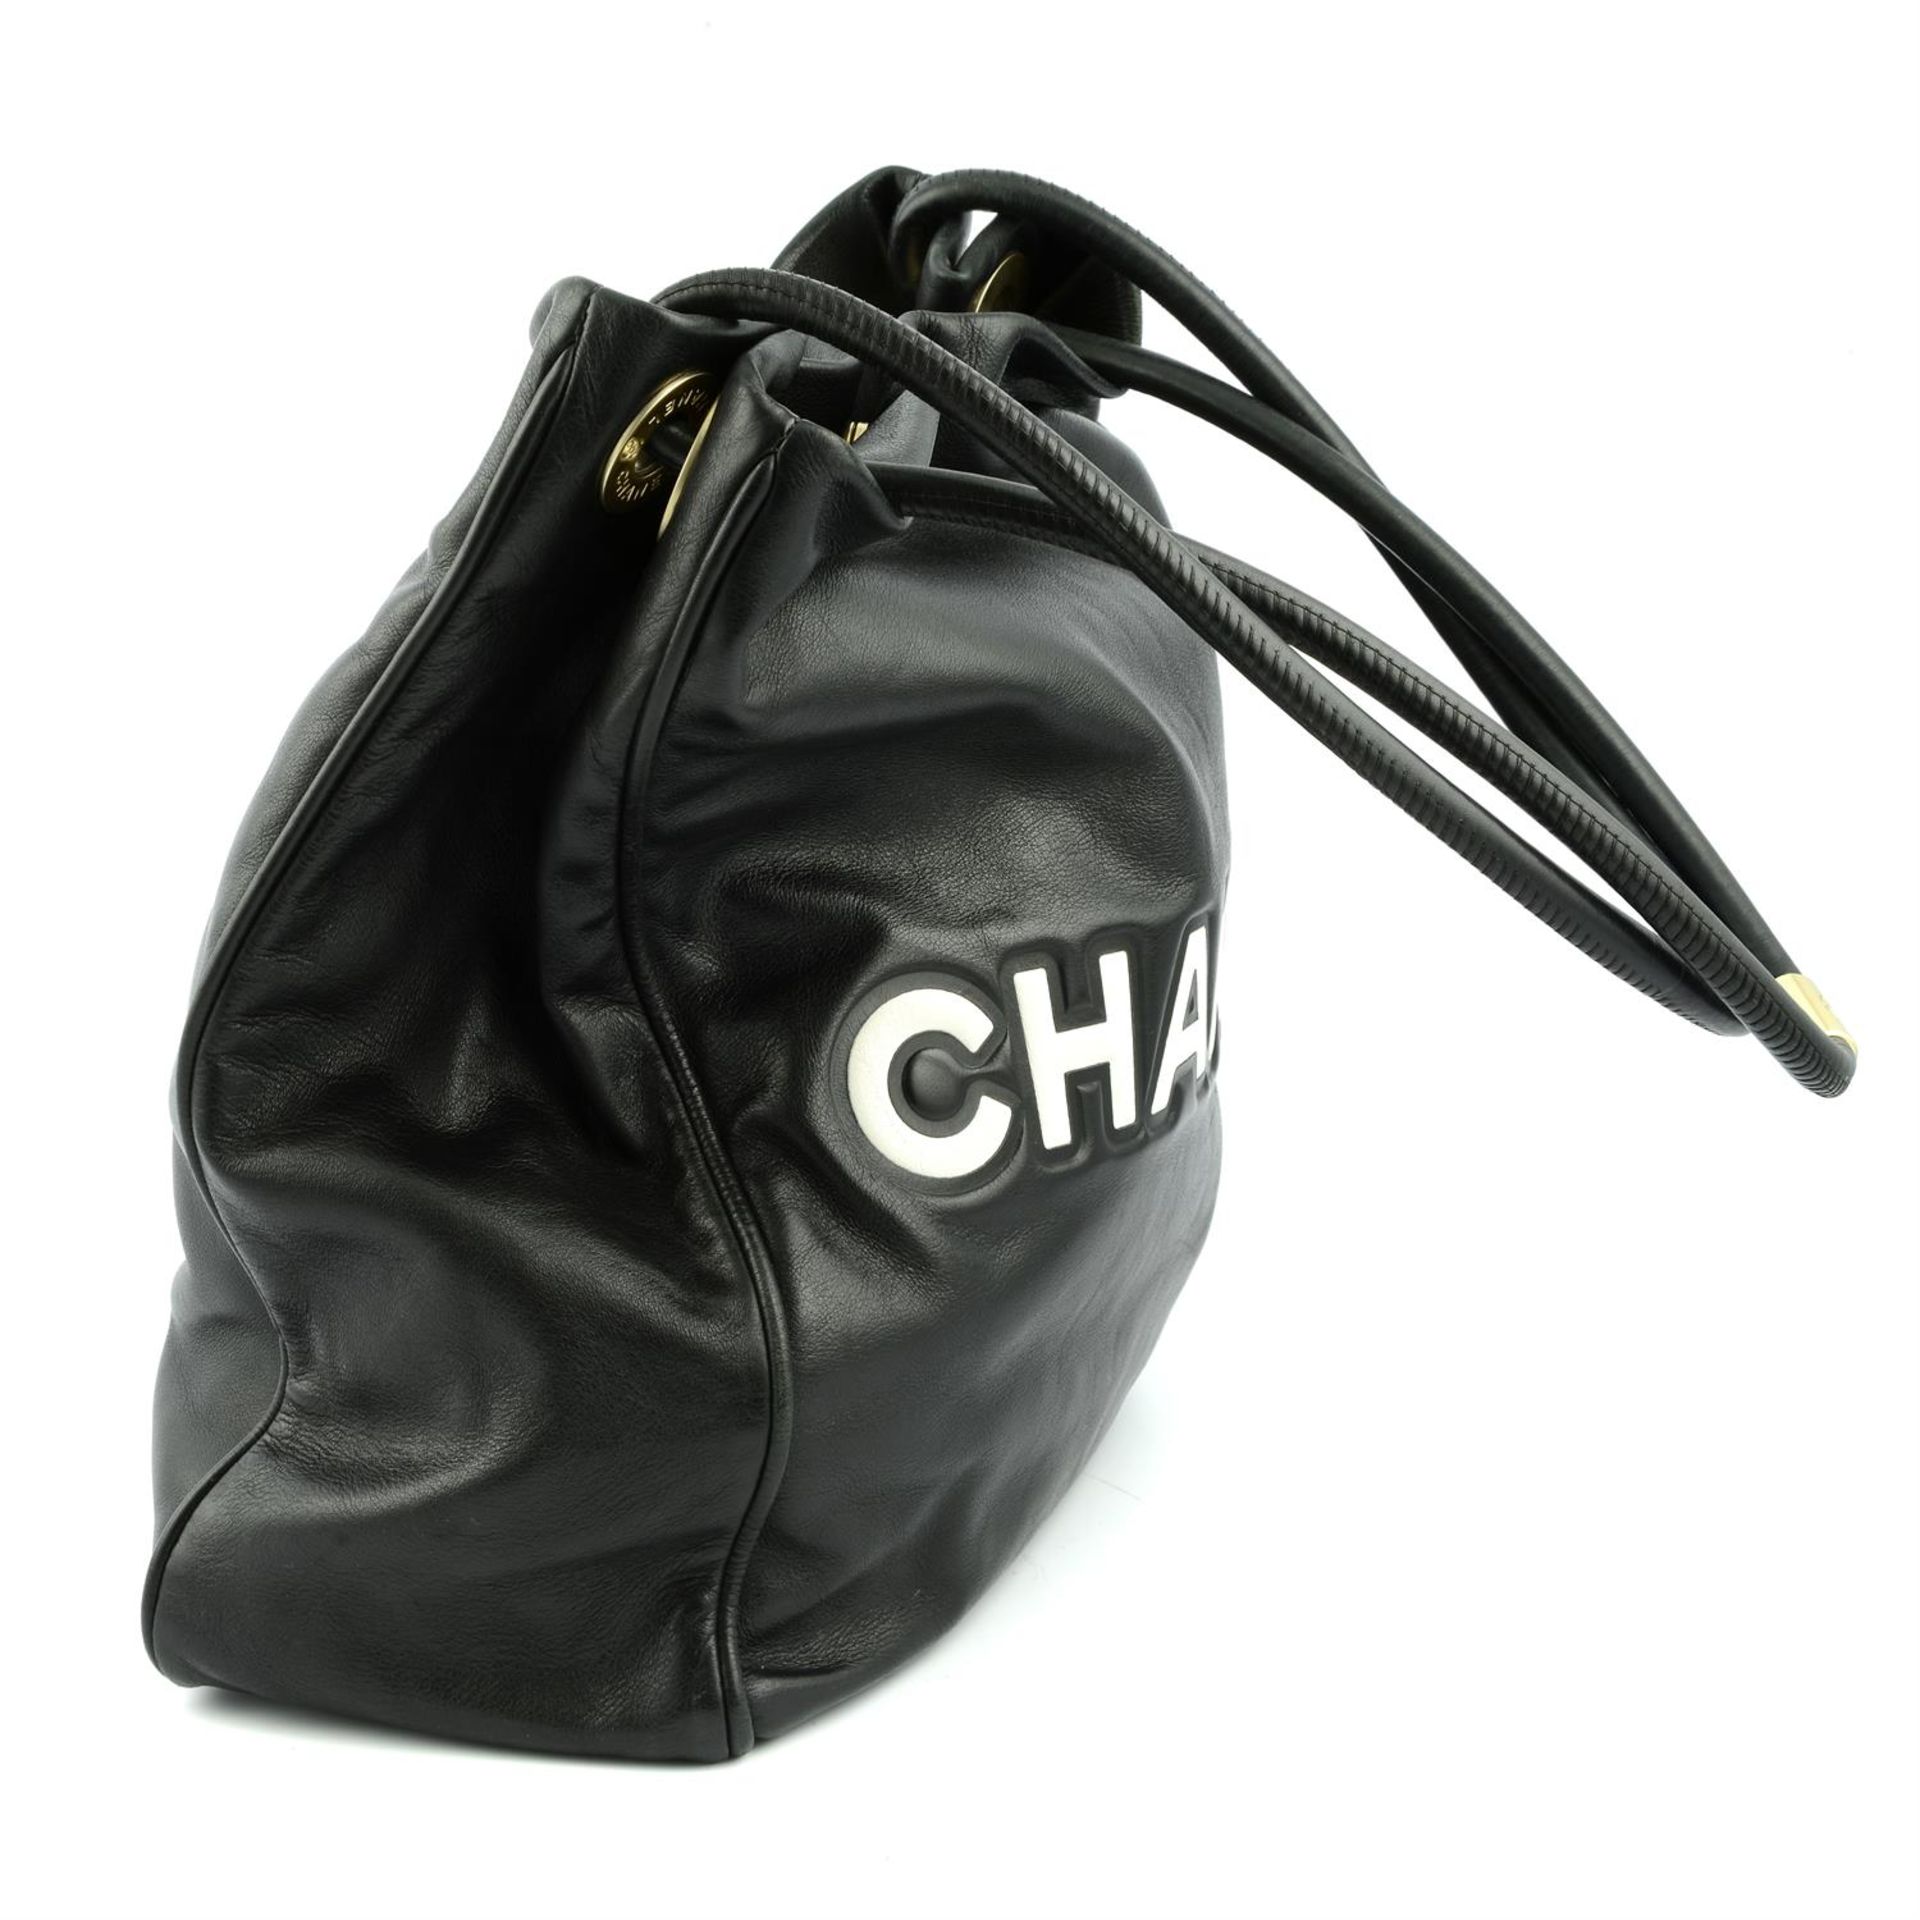 CHANEL - a black leather Camellia tote bag. - Image 3 of 5